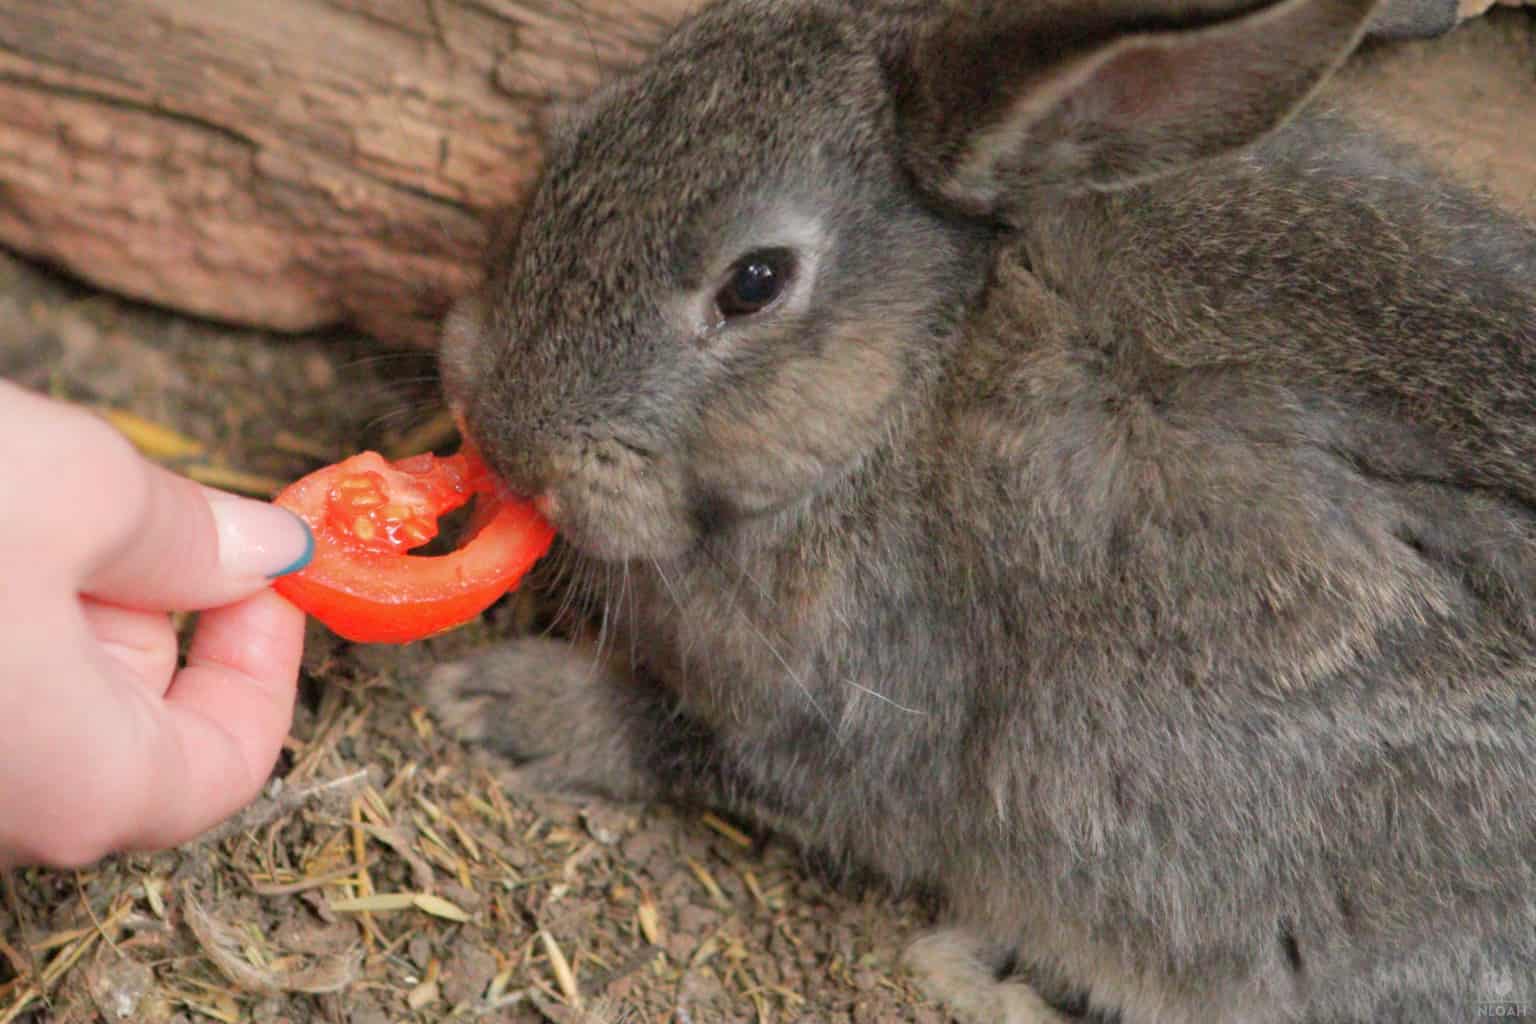 rabbit being fed a tomato slice